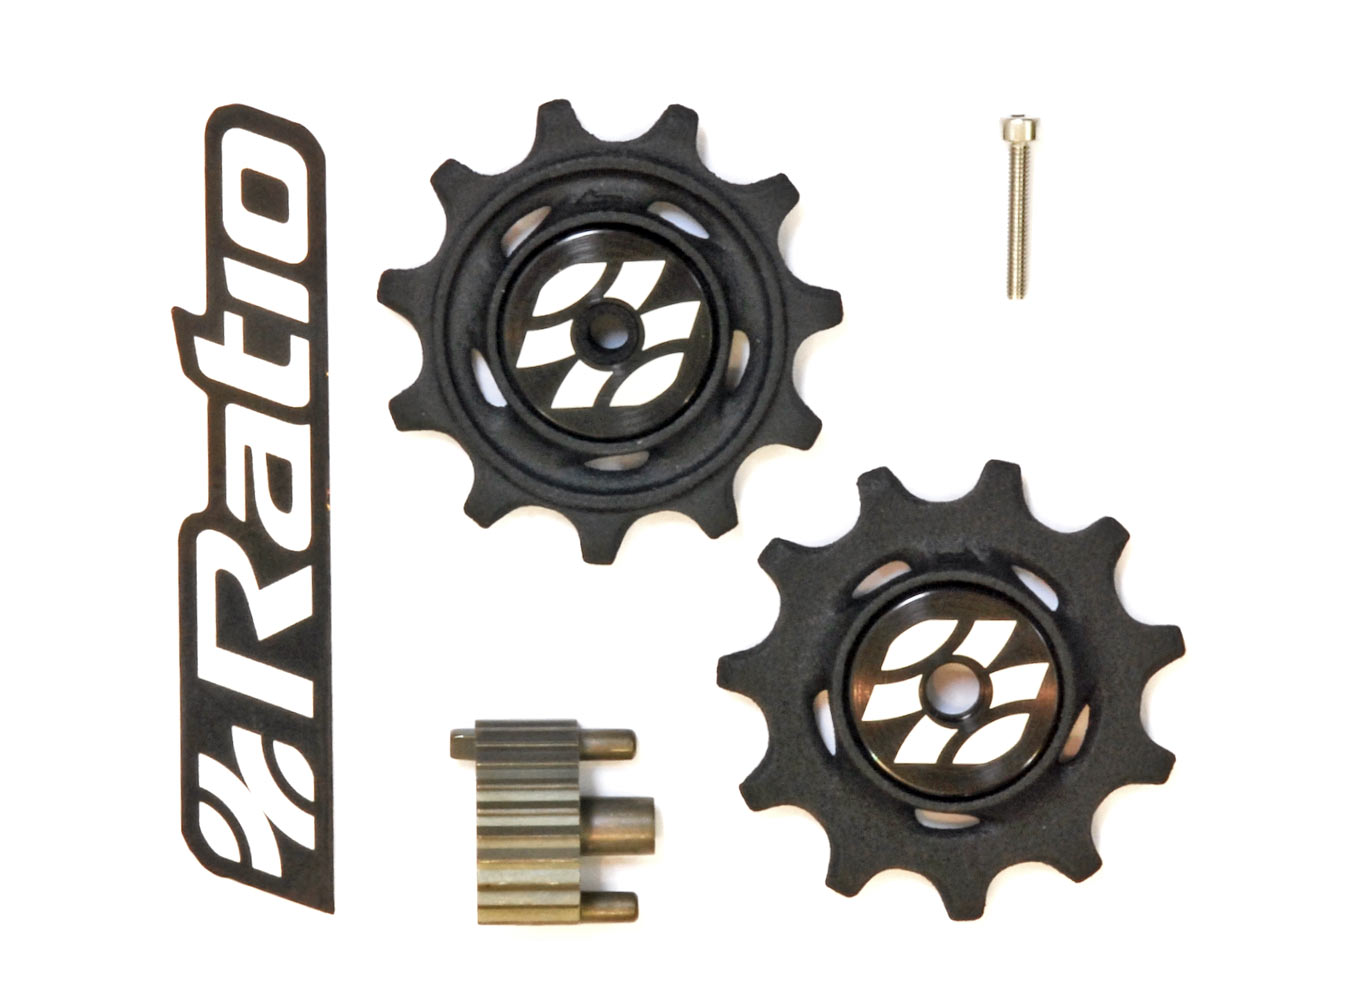 Ratio 2x12 Road Upgrade Kit is lighter, DIY convert 11-speed SRAM Red 22 mechanical to 12-speed AXS compatible, kit contents